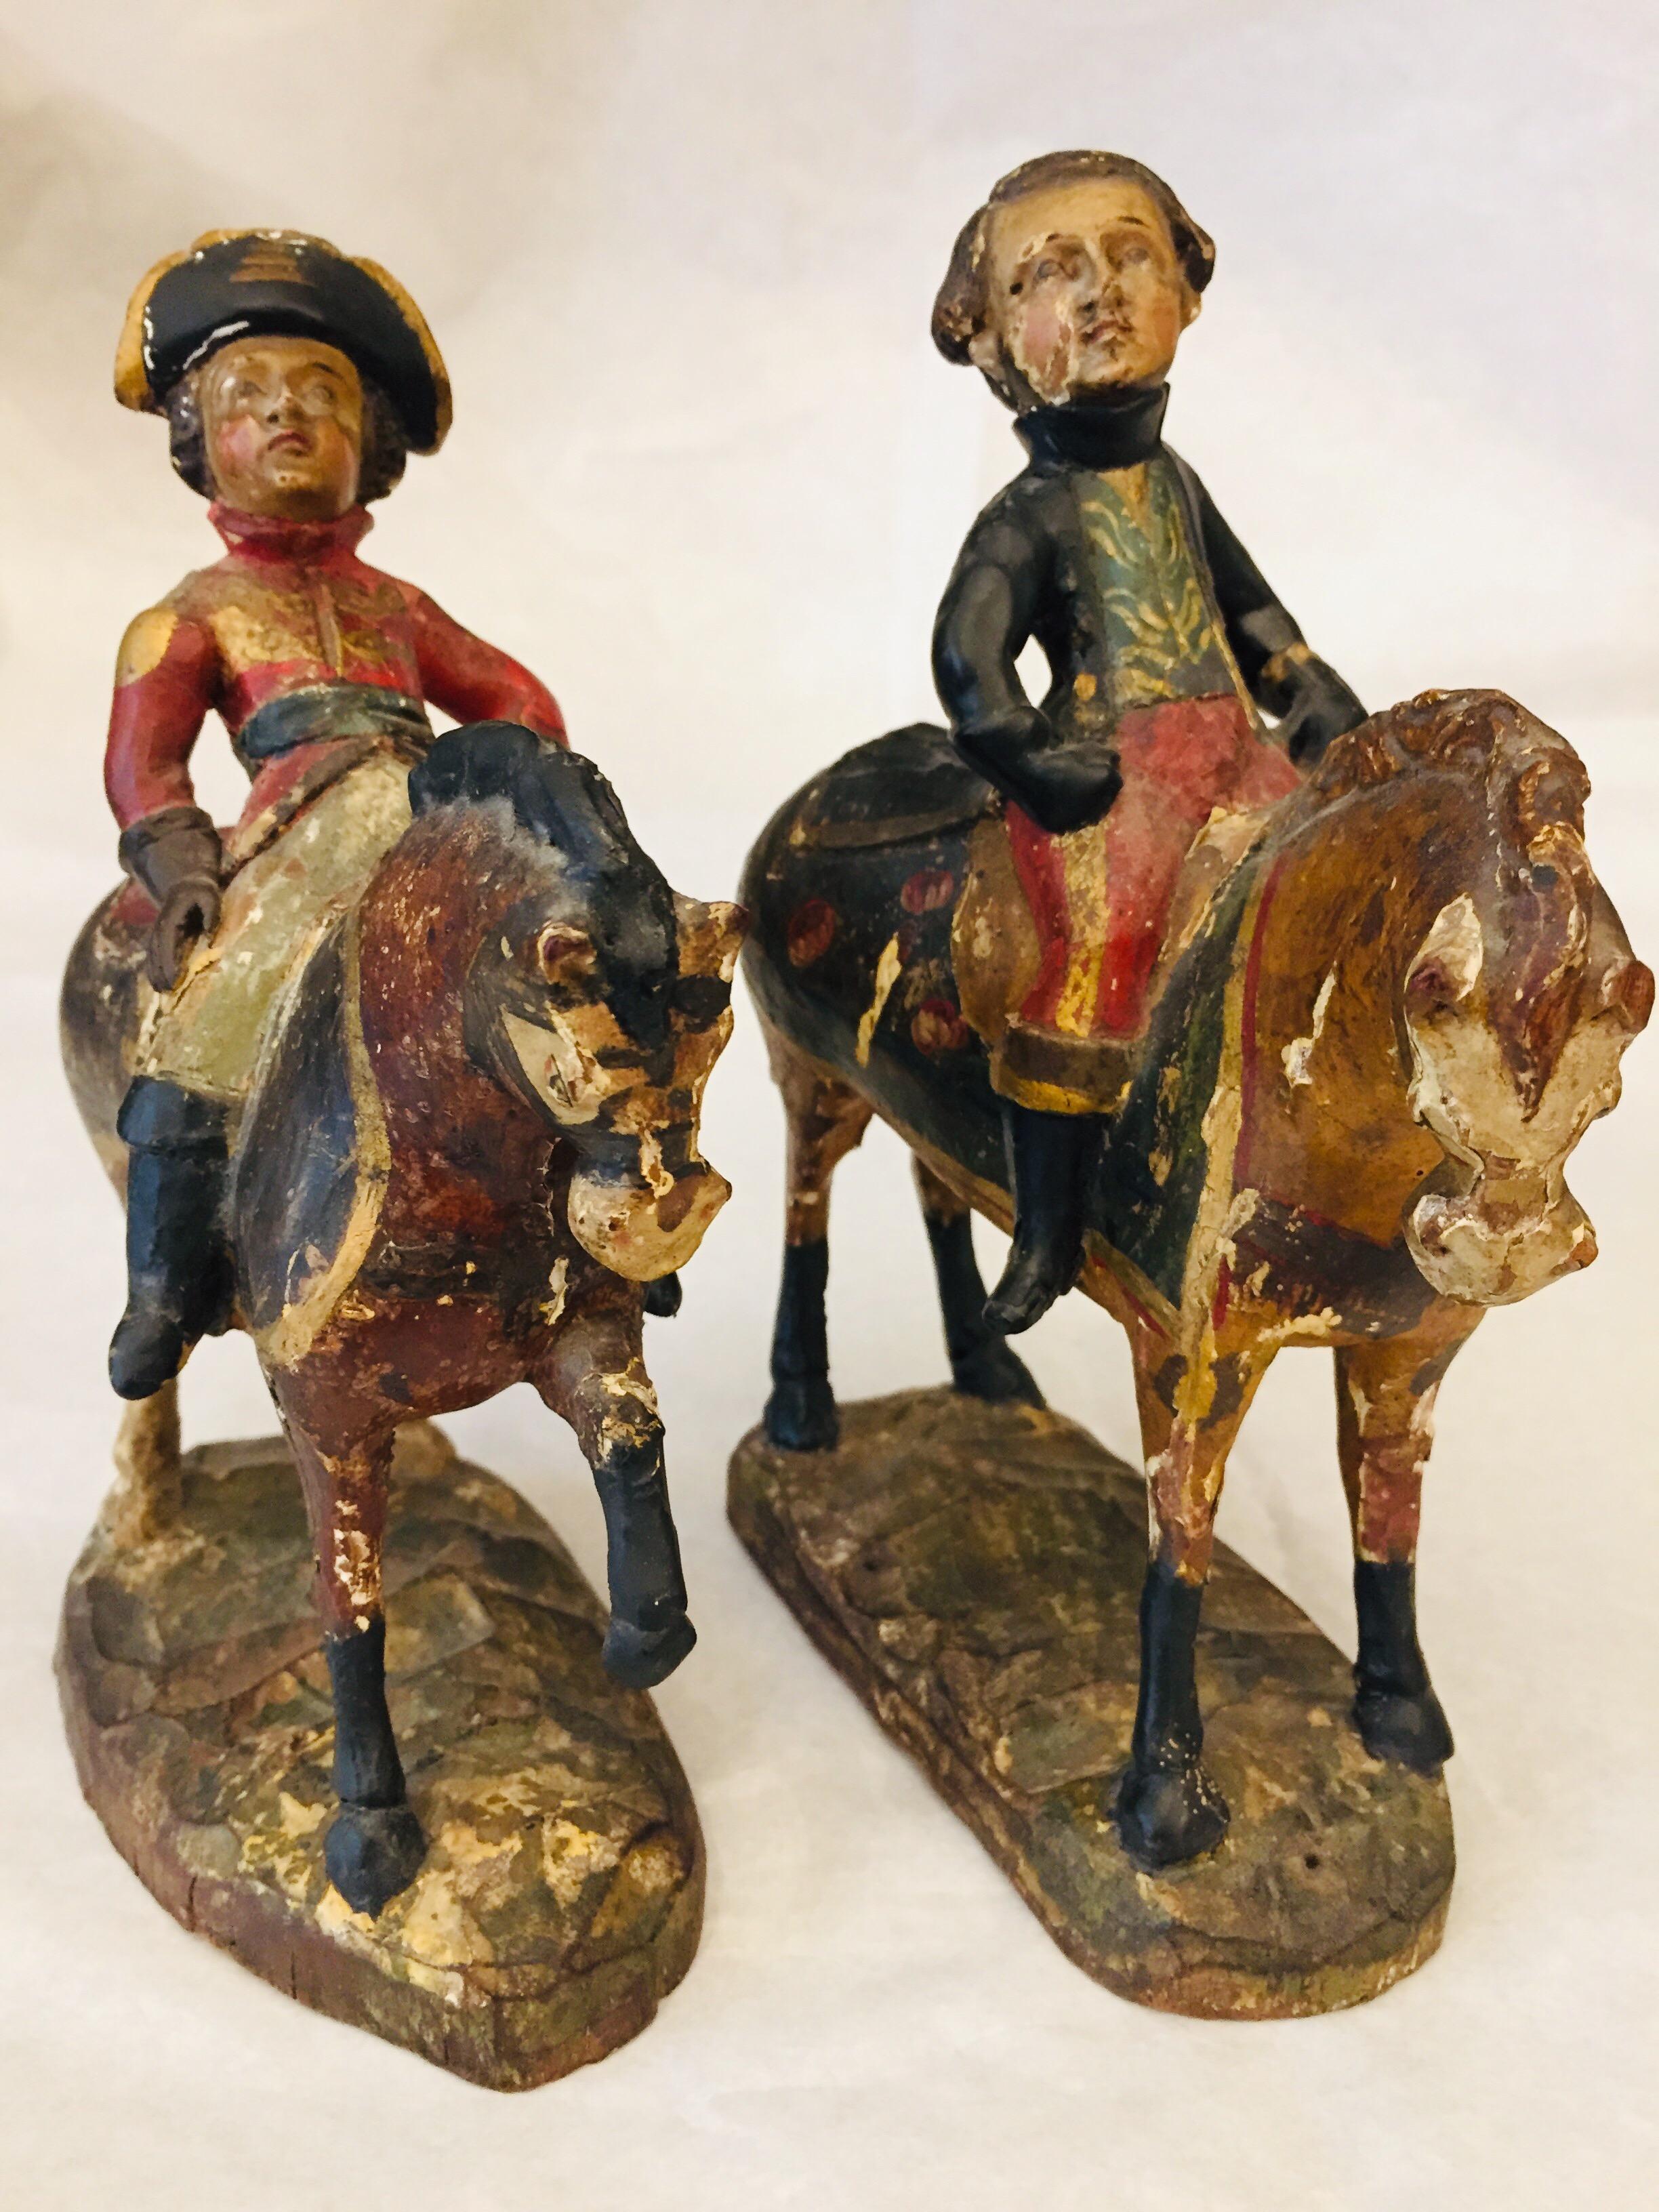 A pair of antique soldier figures with horses of Italian Piedmontese origin, two 19th century soldiers on horseback, hand-carved, gilded and polychrome hand-painted sculptures, realized in Cembran pinewood.

The two knights are wearing different